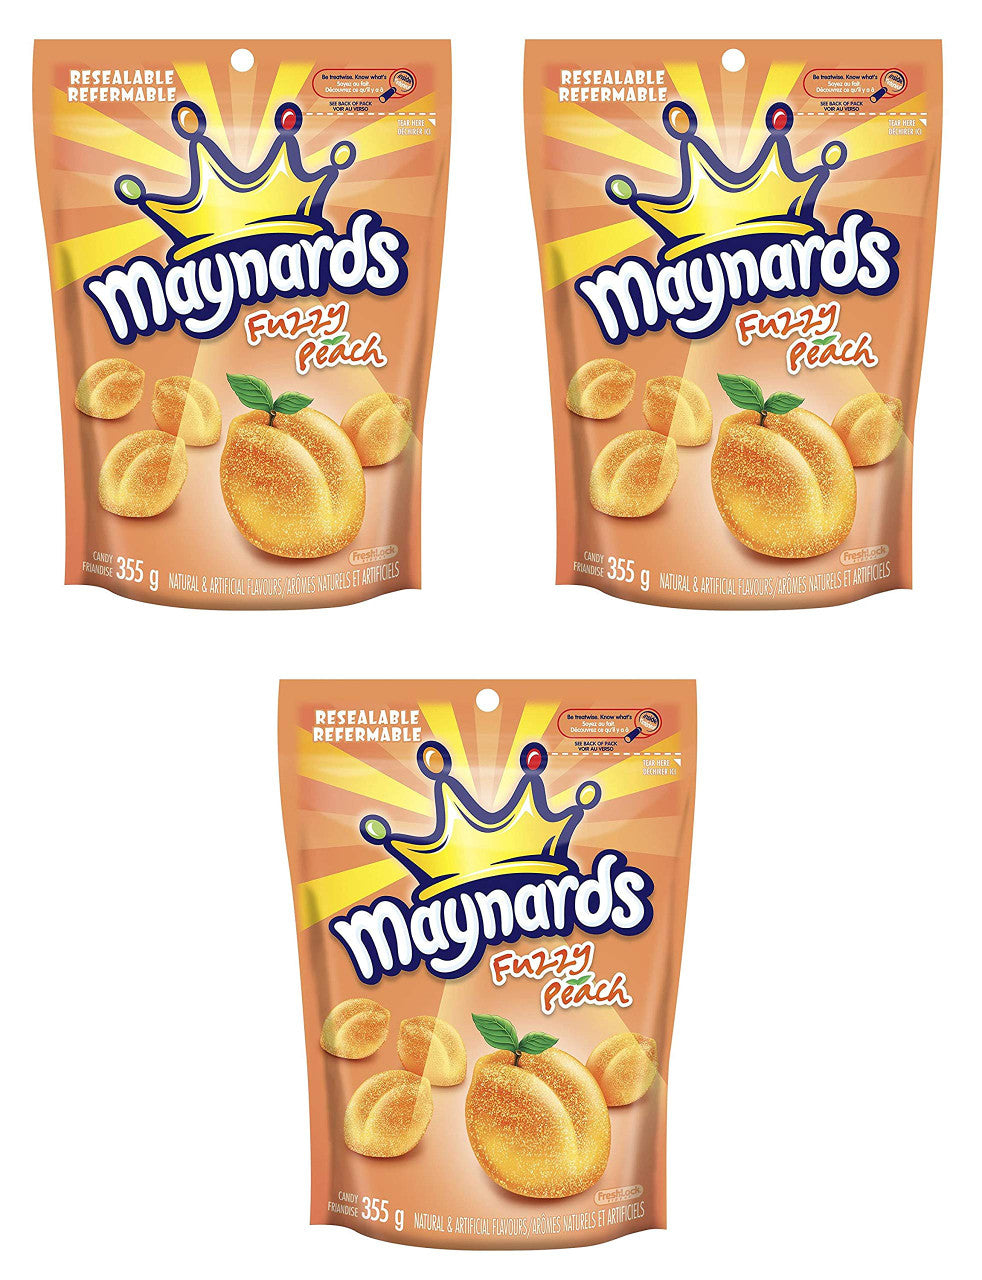 Maynards Fuzzy Peach 355g (12.5oz) Pack of 3, {Imported from Canada}